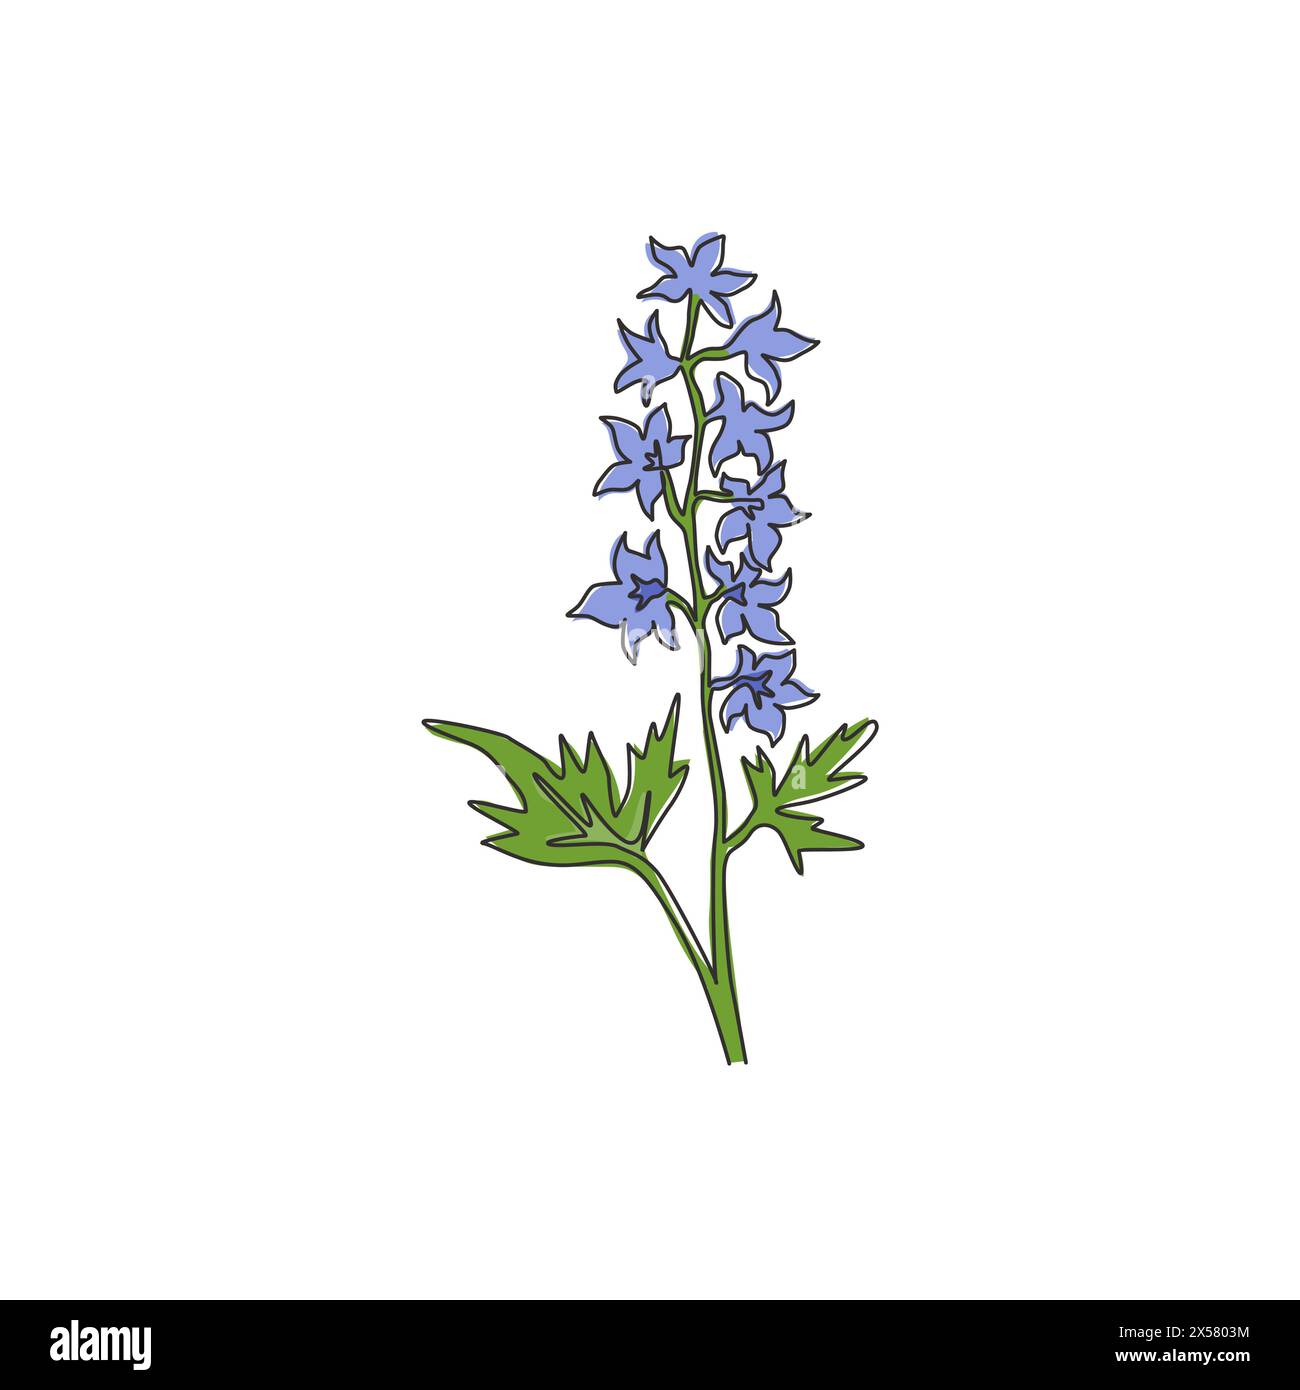 Single one line drawing beauty fresh larkspur for garden logo. Decorative of perennial delphinium concept for home wall decor art poster print. Modern Stock Vector